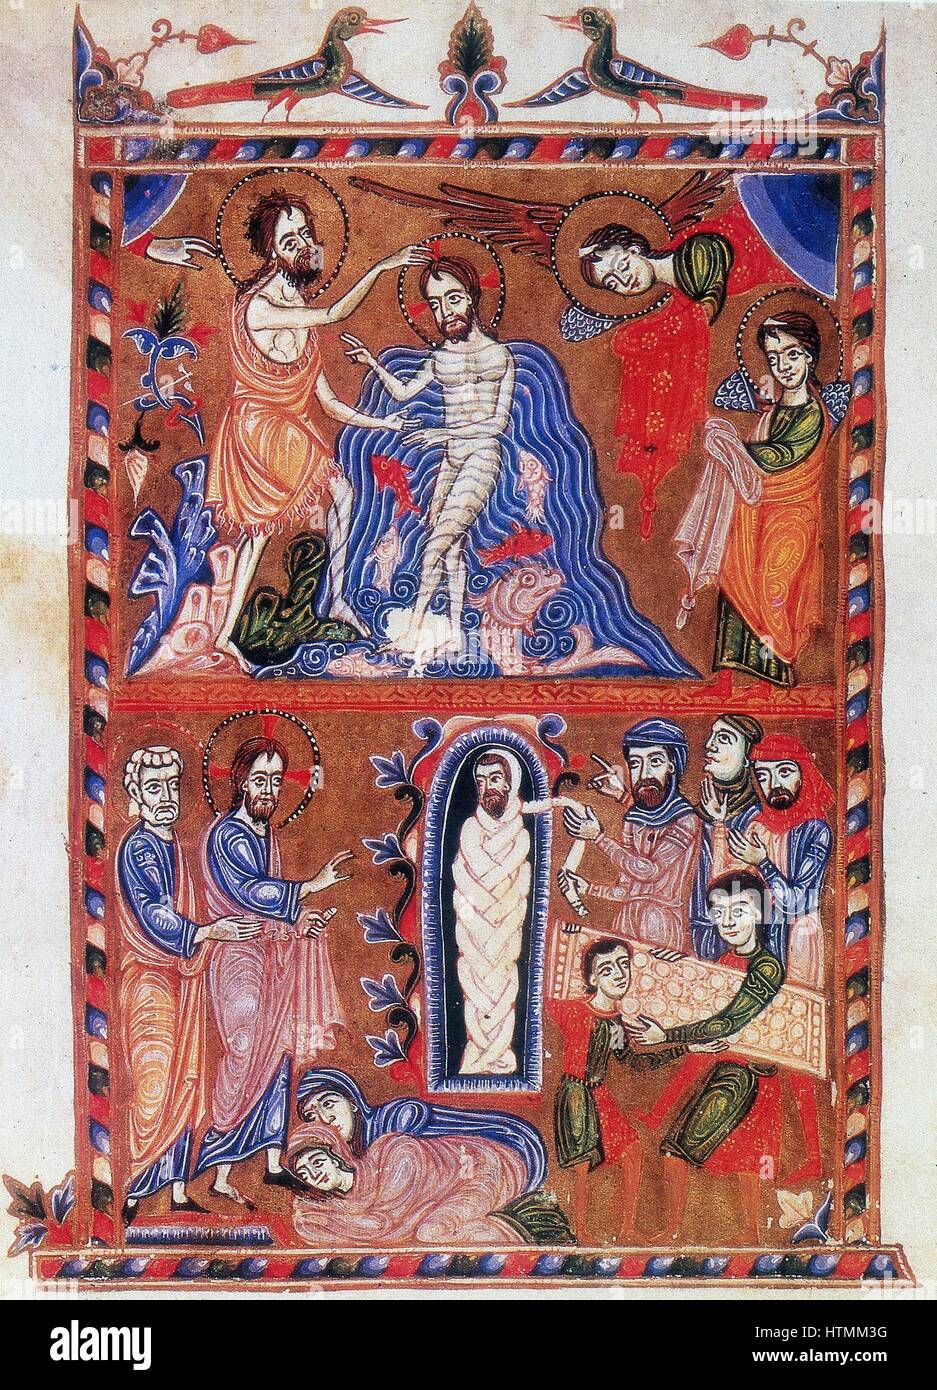 Baptism of Jesus by St John the Baptist (top) and Raising of Lazarus after four days. At feet of Jesus are Martha and Mary, sisters of Lazarus (bottom). After Armenian Evangelistery (1336). Calligraphy and painting by Sarkis Pitsak. Stock Photo